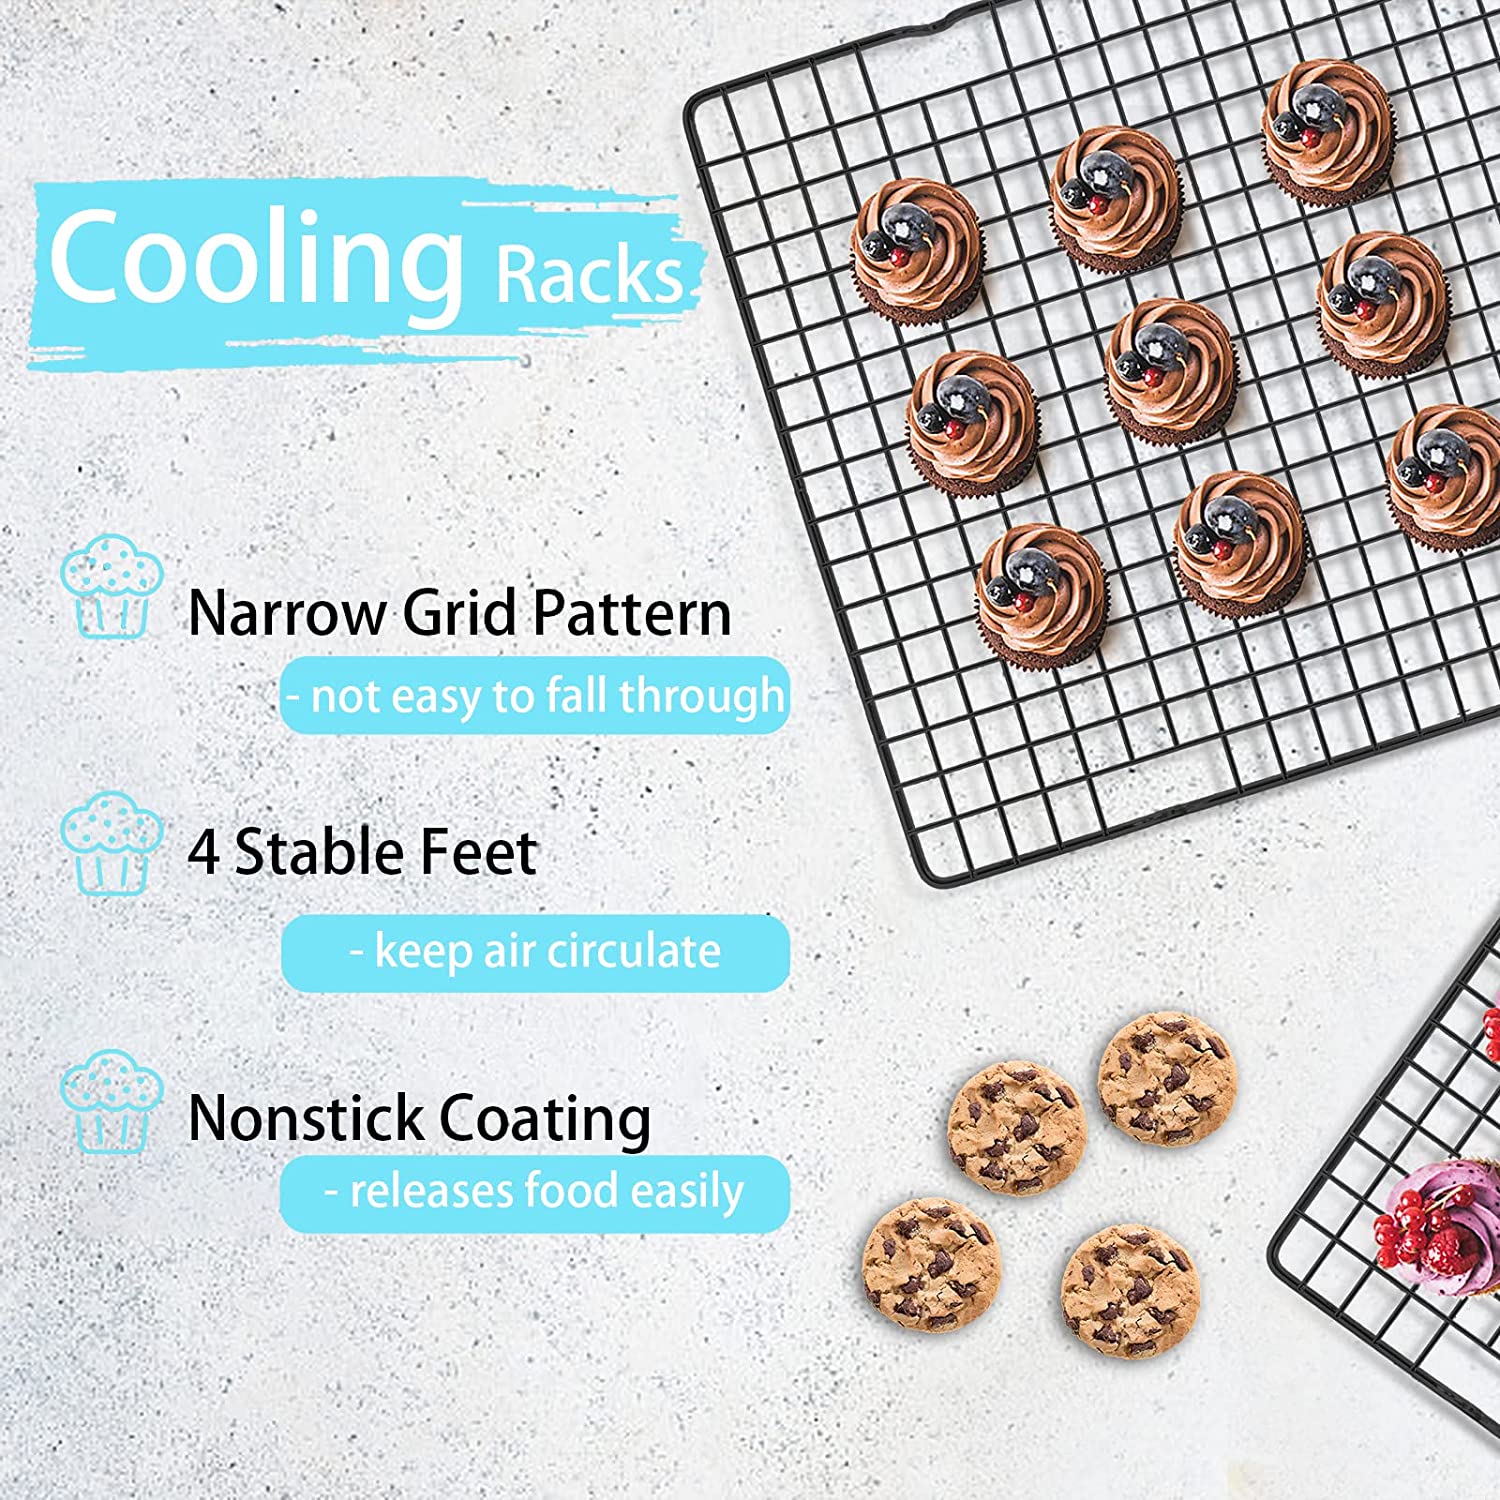 Homikit 2 Pack Wire Baking Rack, Stainless Steel 12 x 9 Bake Grill Rack  for Cooking Roasting Grilling, Mesh Cooling Rack for Cookie Cake Bacon Meat